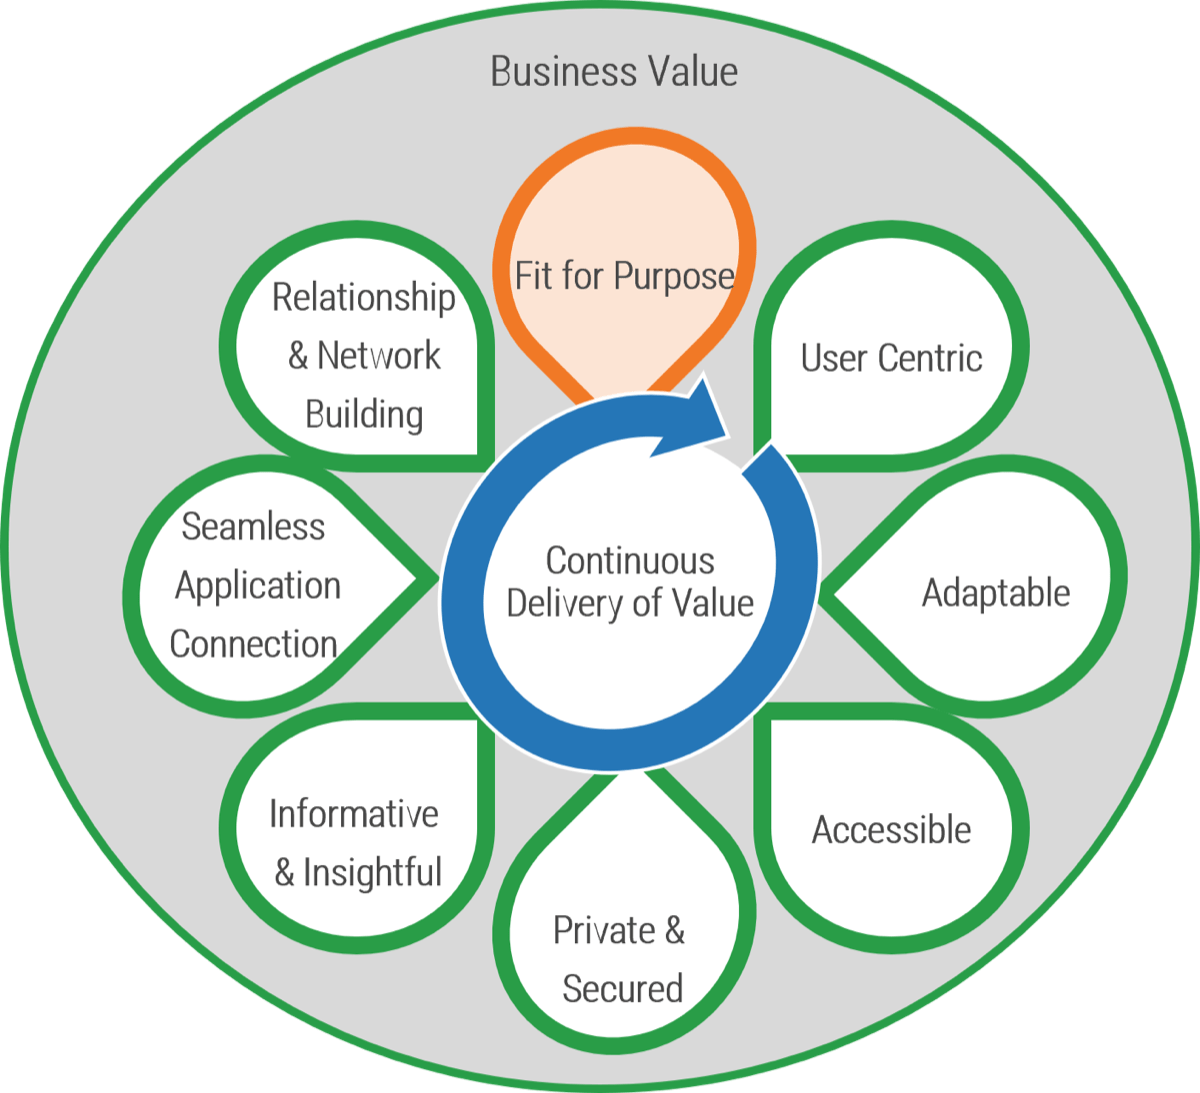 Cyclical diagram of the 'Continuous Delivery of Value' within 'Business Value'. Surrounding attributes are 'User Centric', 'Adaptable', 'Accessible', 'Private & Secured', 'Informative & Insightful', 'Seamless Application Connection', 'Relationship & Network Building', 'Fit for Purpose'.